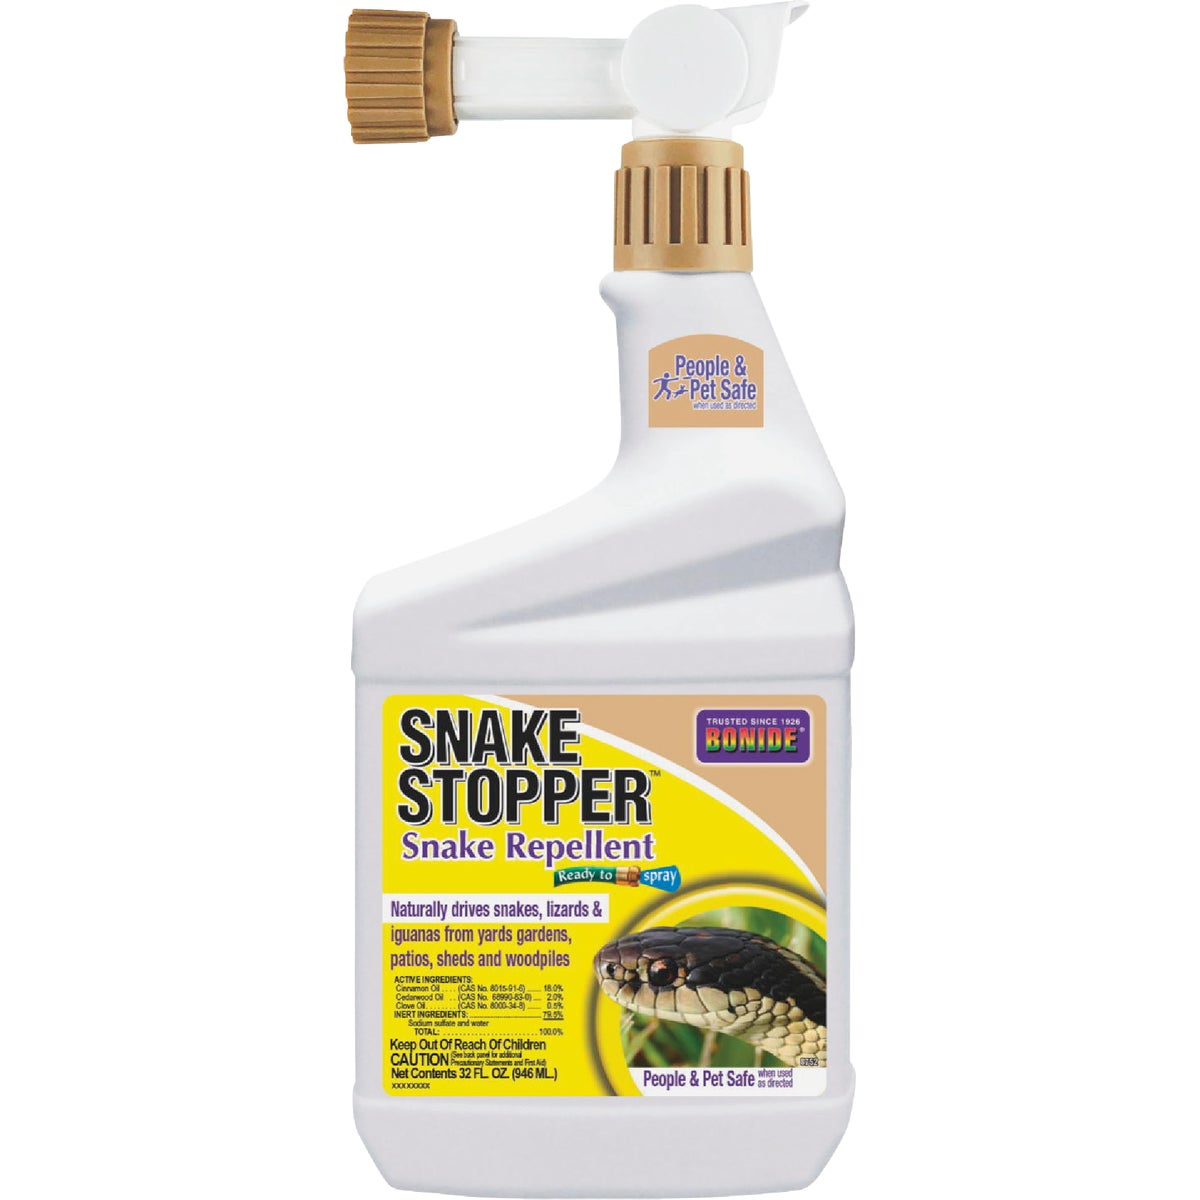 Item 700203, Snake Stopper Snake Repellent helps to naturally deter snakes from your 